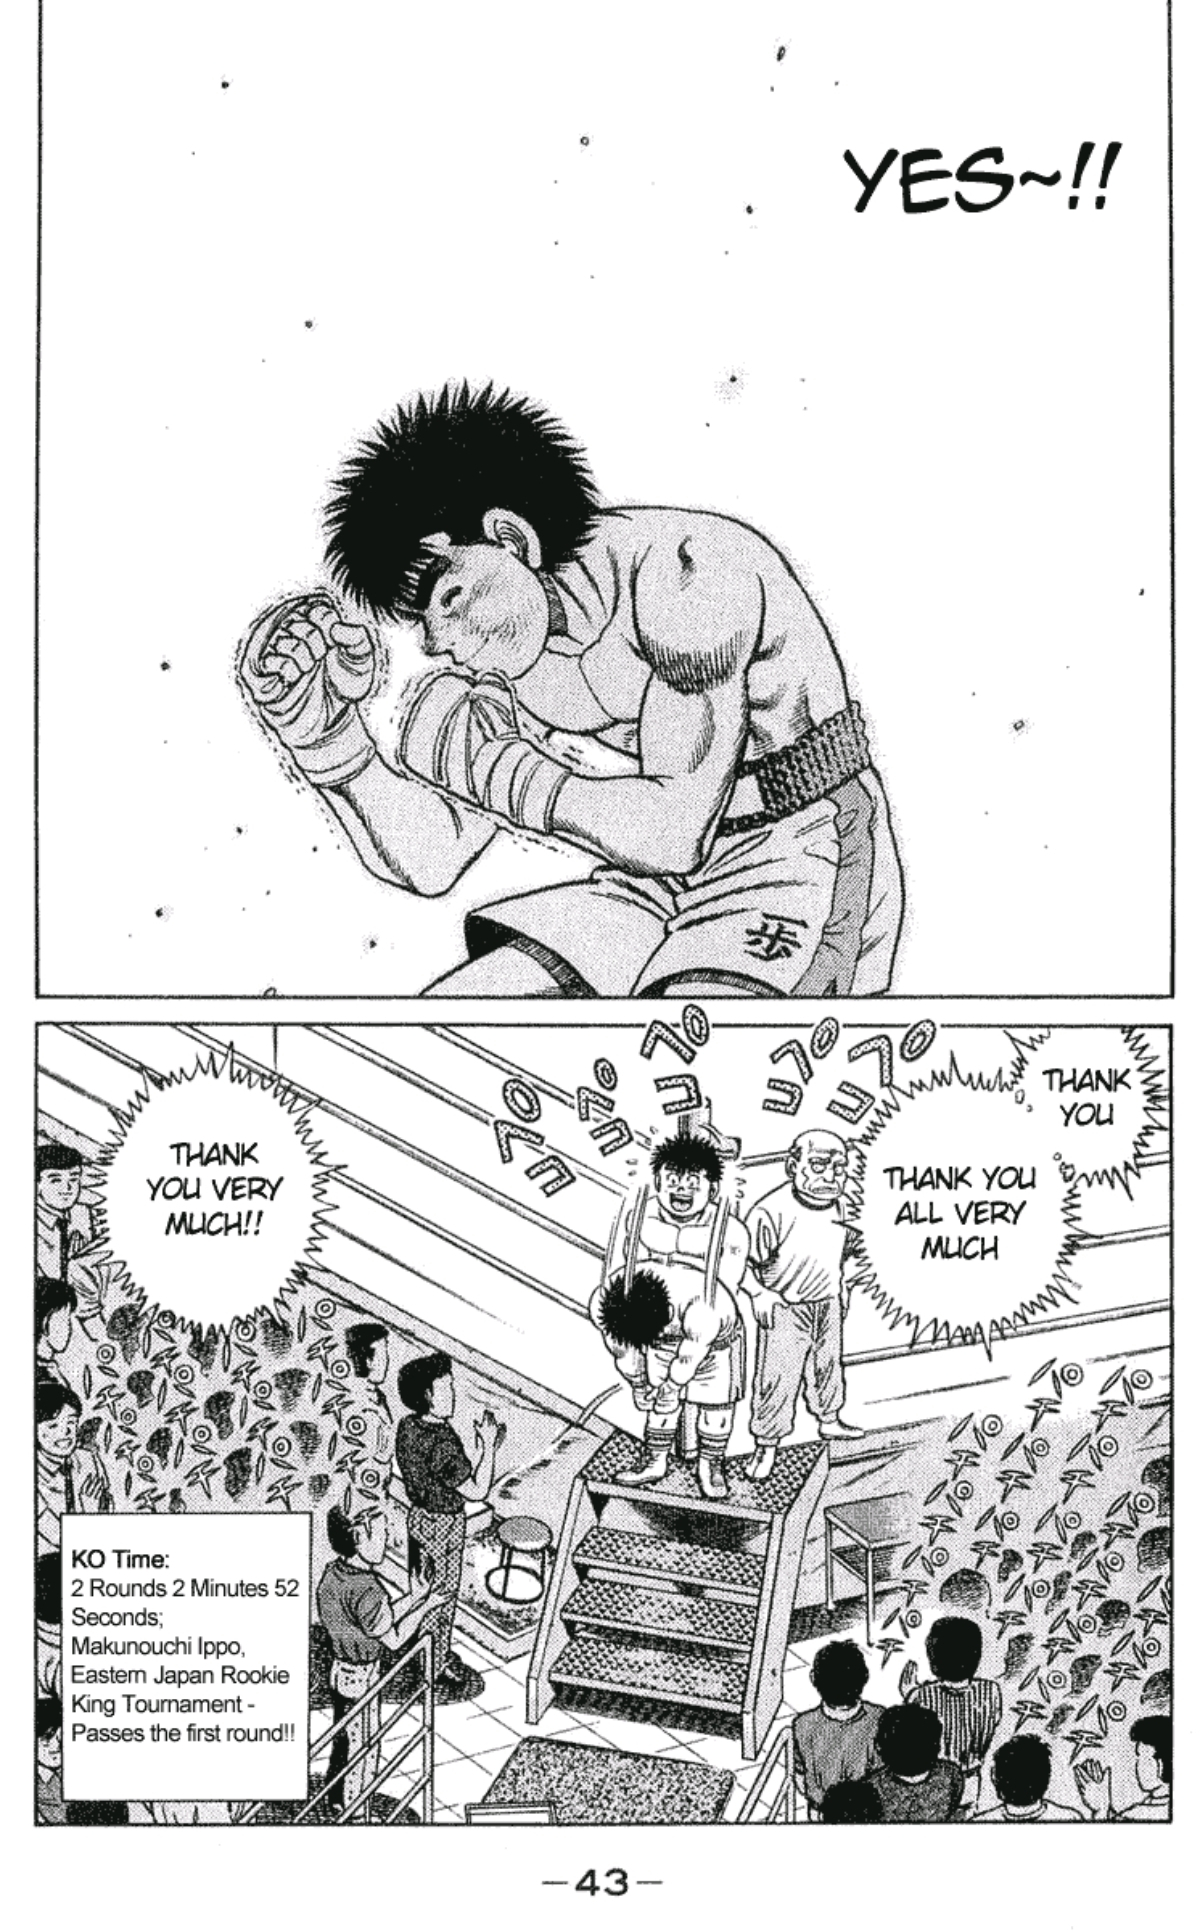 Ippo clutches his fists in barely restrained jubilation, then bows with embarassing enthusiasm to the clapping crowd. His record is 3 fights, 3 wins.